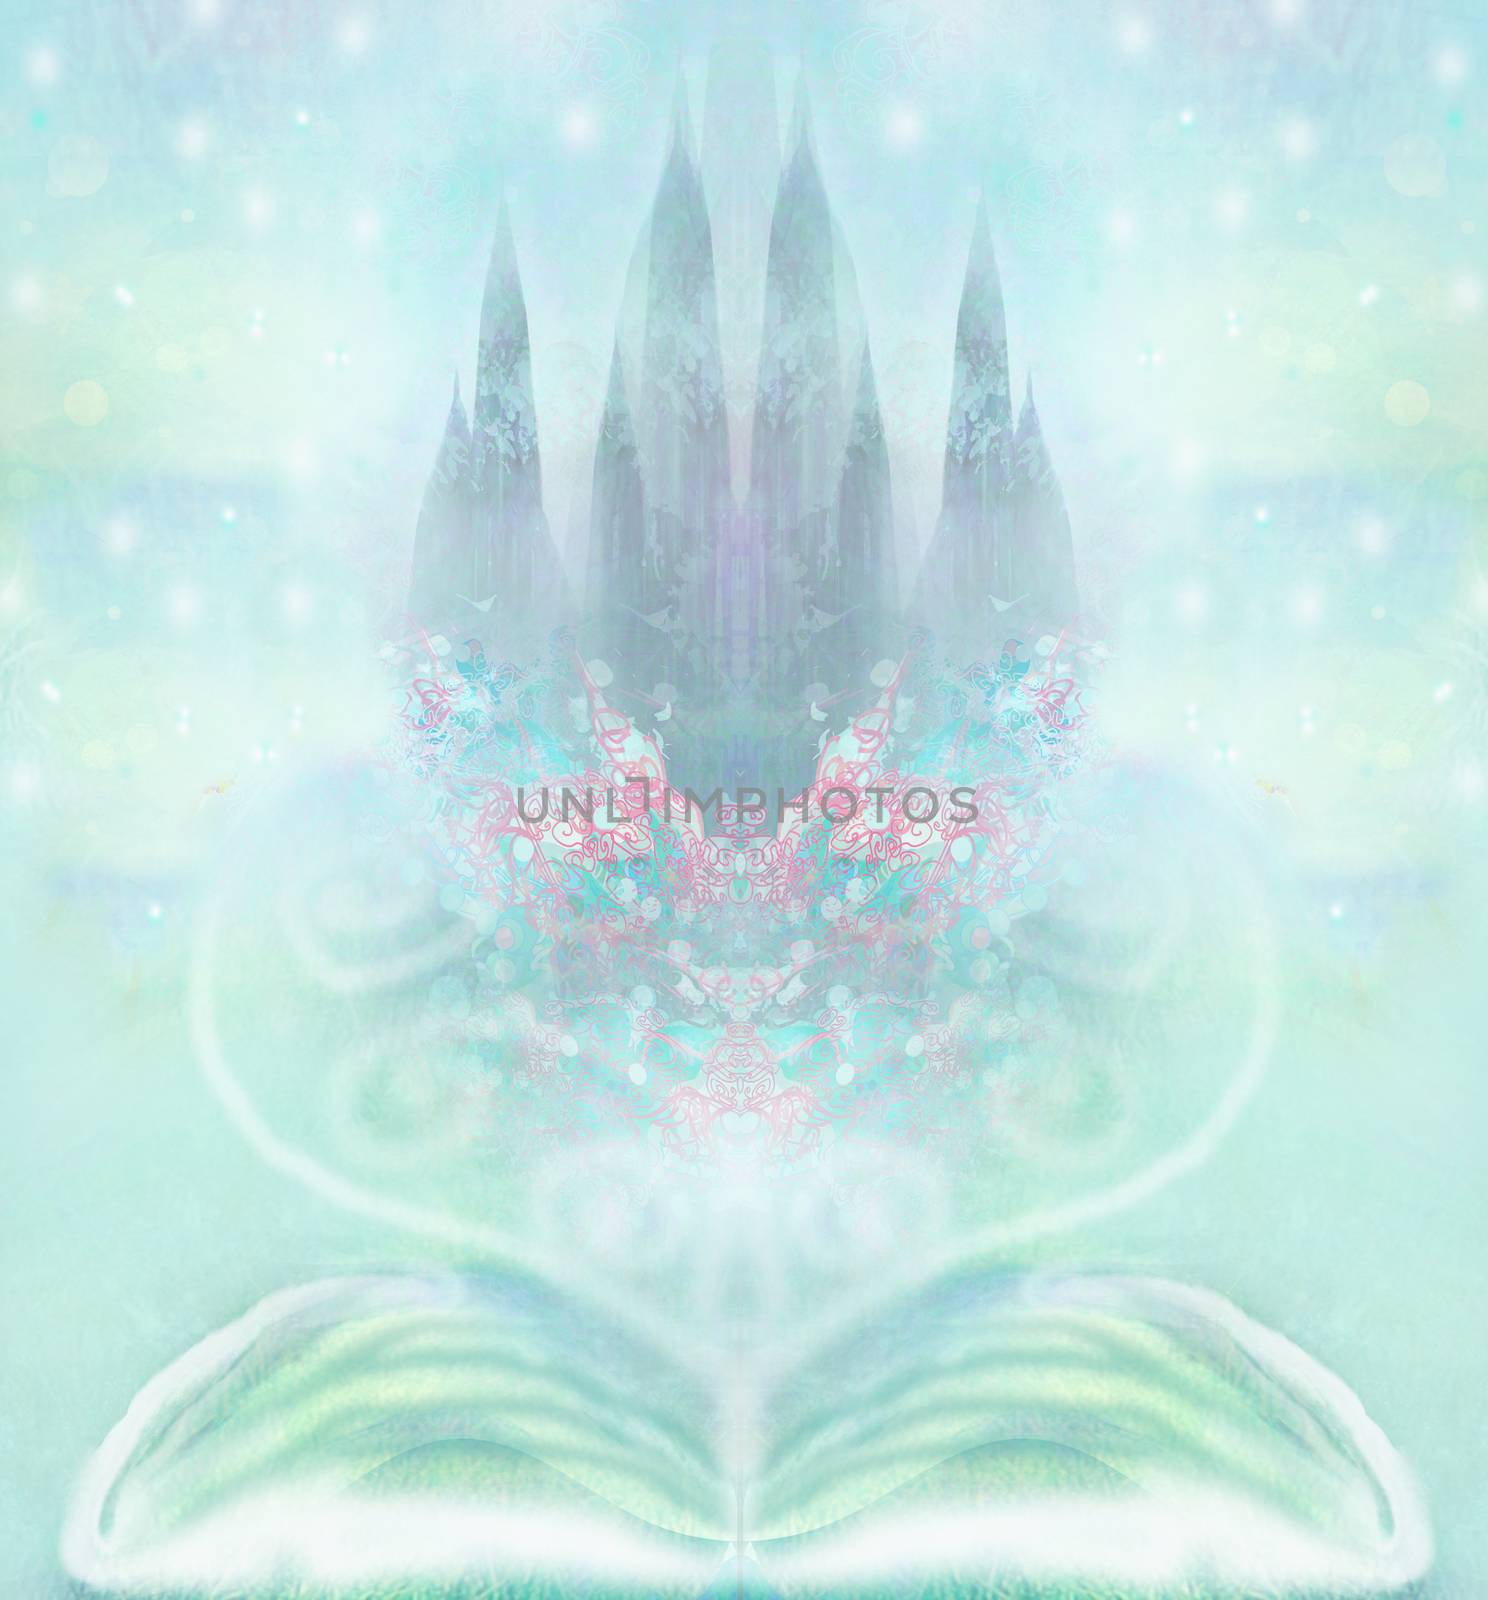 Magic world of tales, fairy castle appearing from the book by JackyBrown